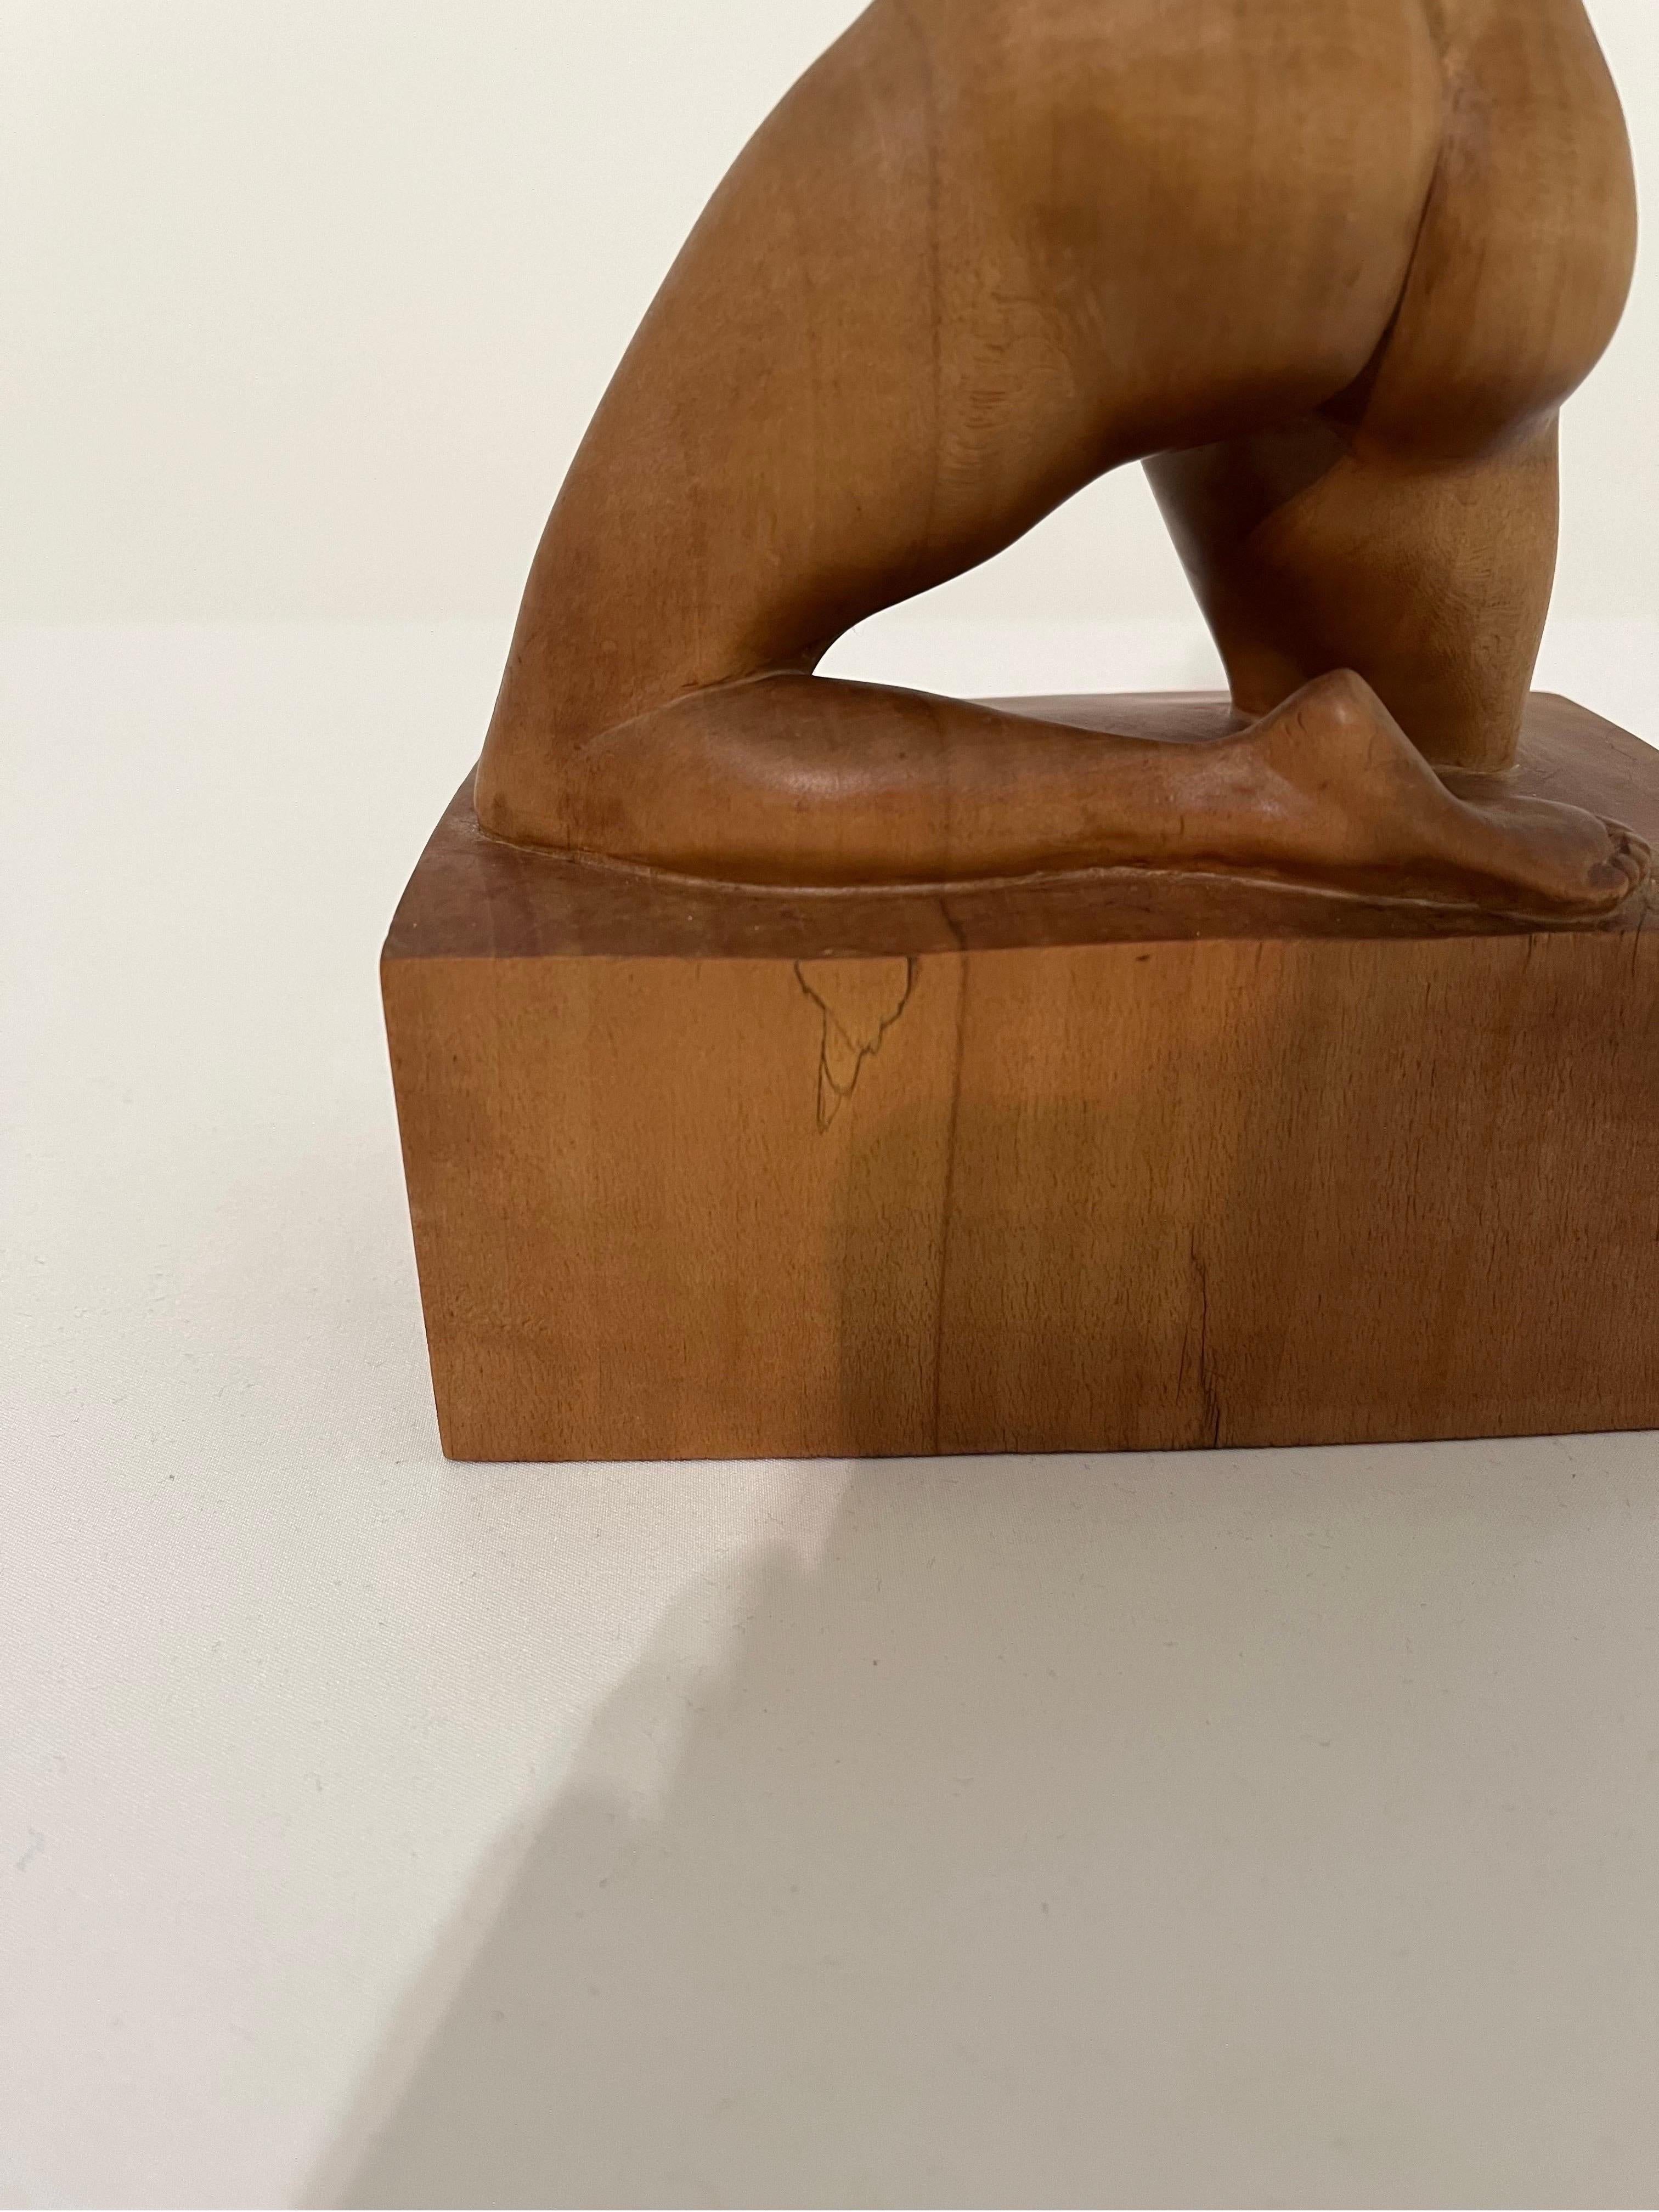 Female Nude Figure Bust Wood Carving 1960s sculpture  For Sale 2